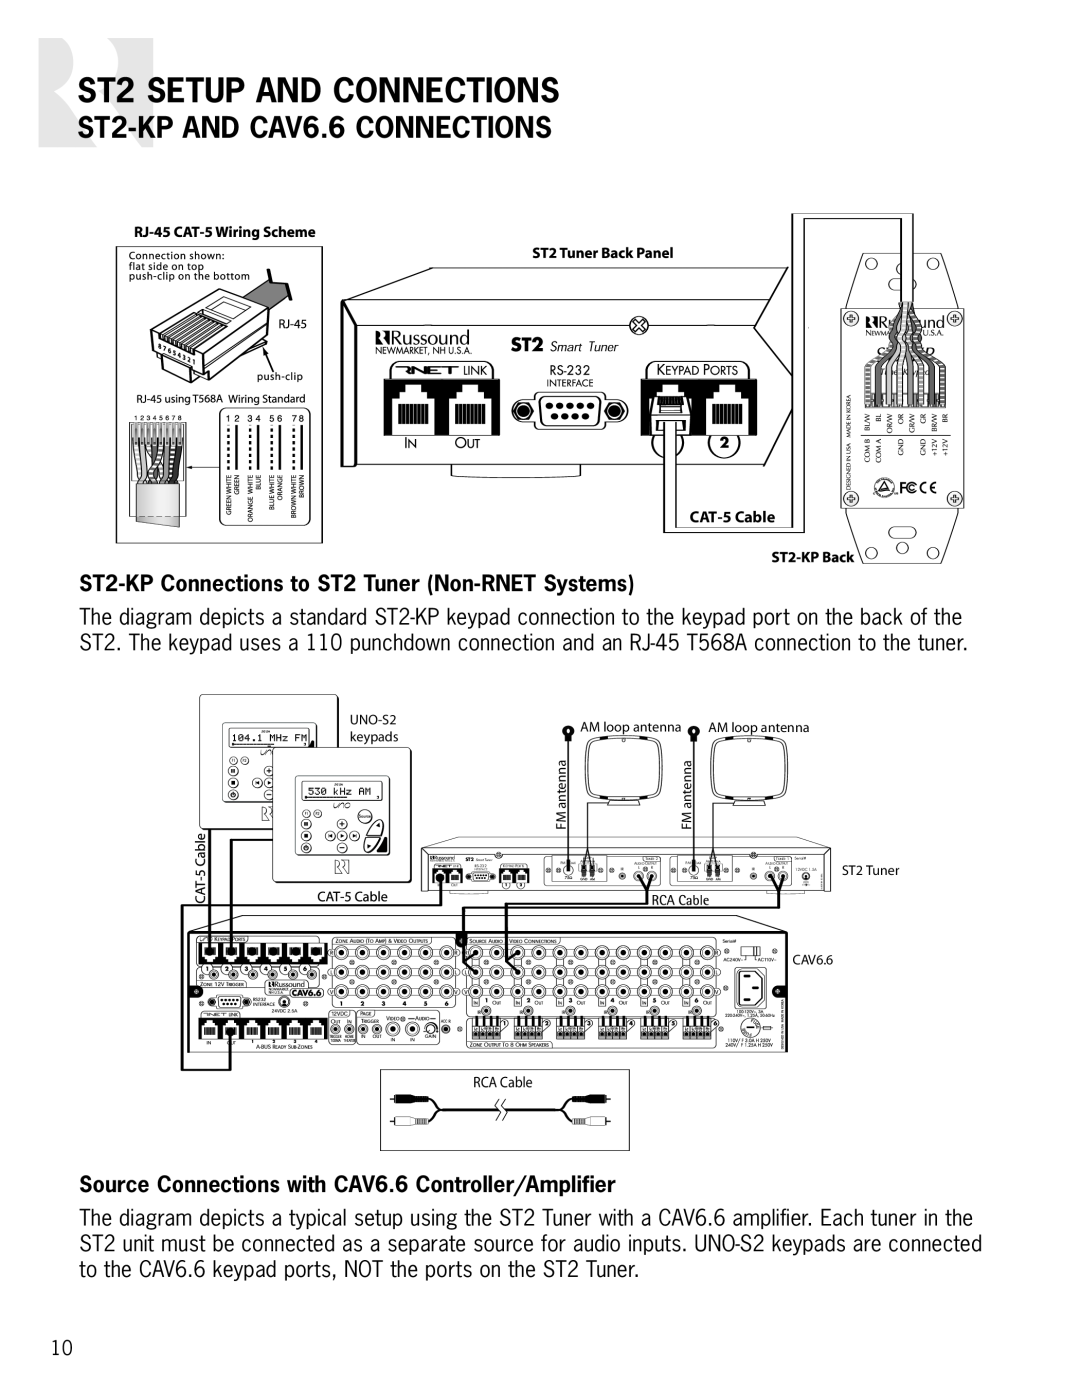 Integra ST2-KPAND CAV6.6 CONNECTIONS, ST2-KPConnections to ST2 Tuner Non-RNETSystems, ST2 SETUP AND CONNECTIONS, UNO-S2 